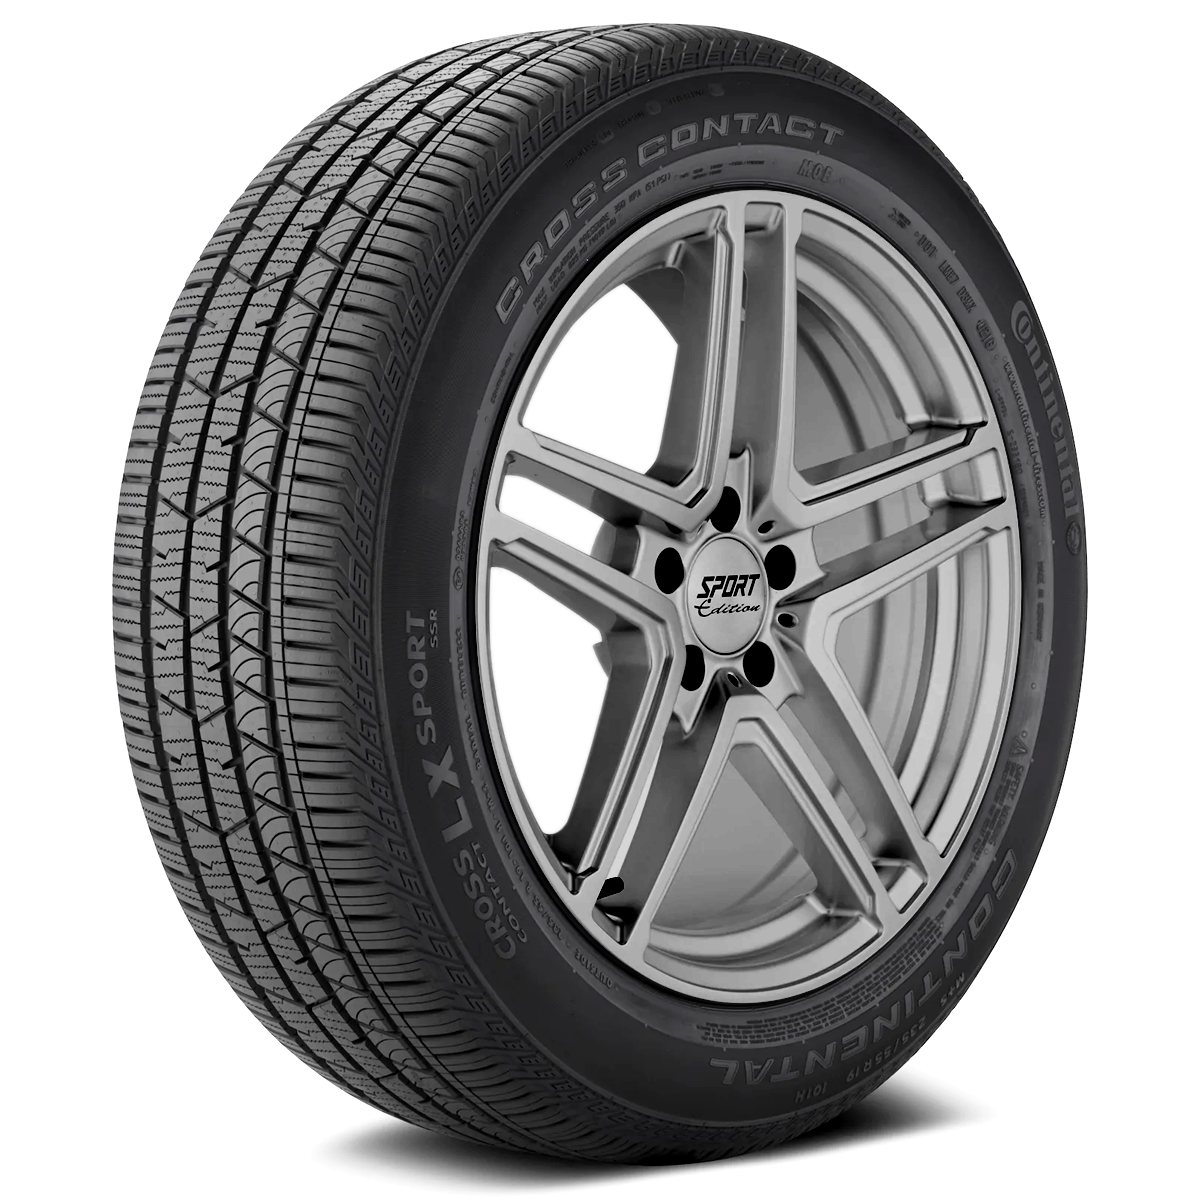 Continental CROSSCONTACT LX. Continental CROSSCONTACT LX Sport 255/55r19. Continental CROSSCONTACT LX 2. Continental crosscontact lx sport